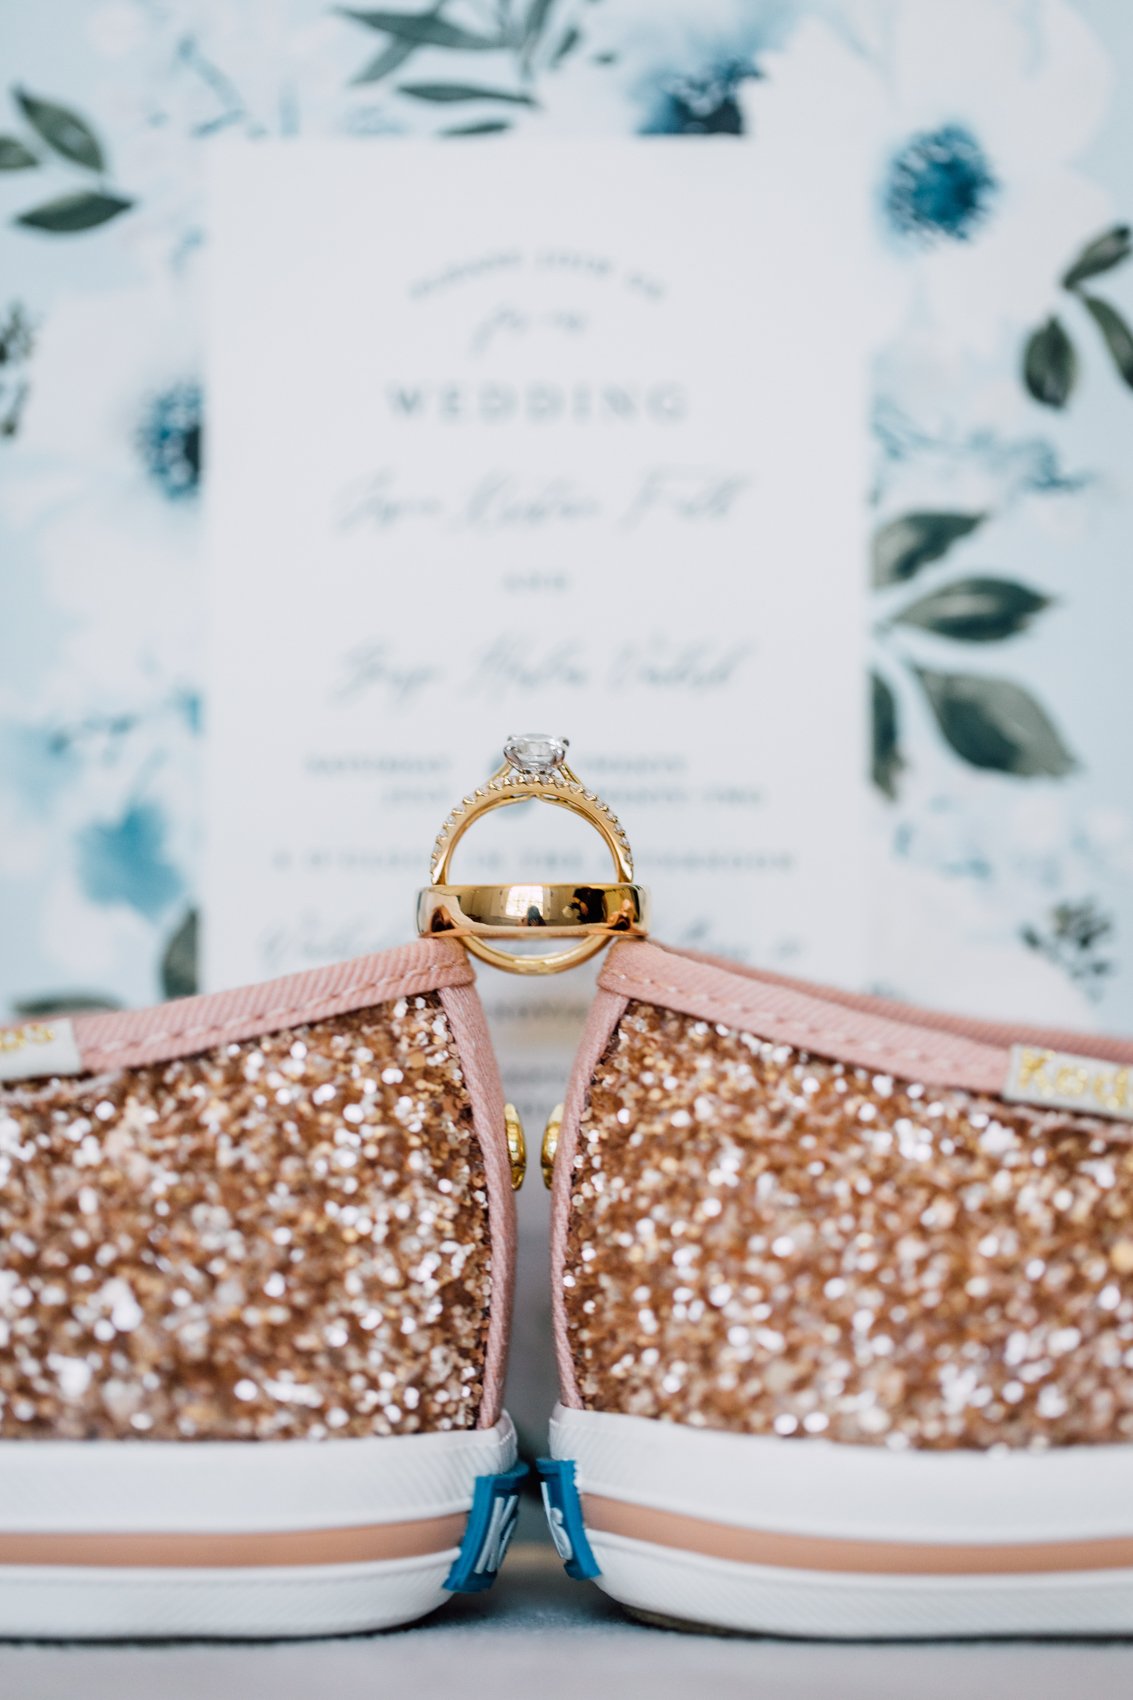  Gold wedding ring balance on top of sparkly wedding shoes 